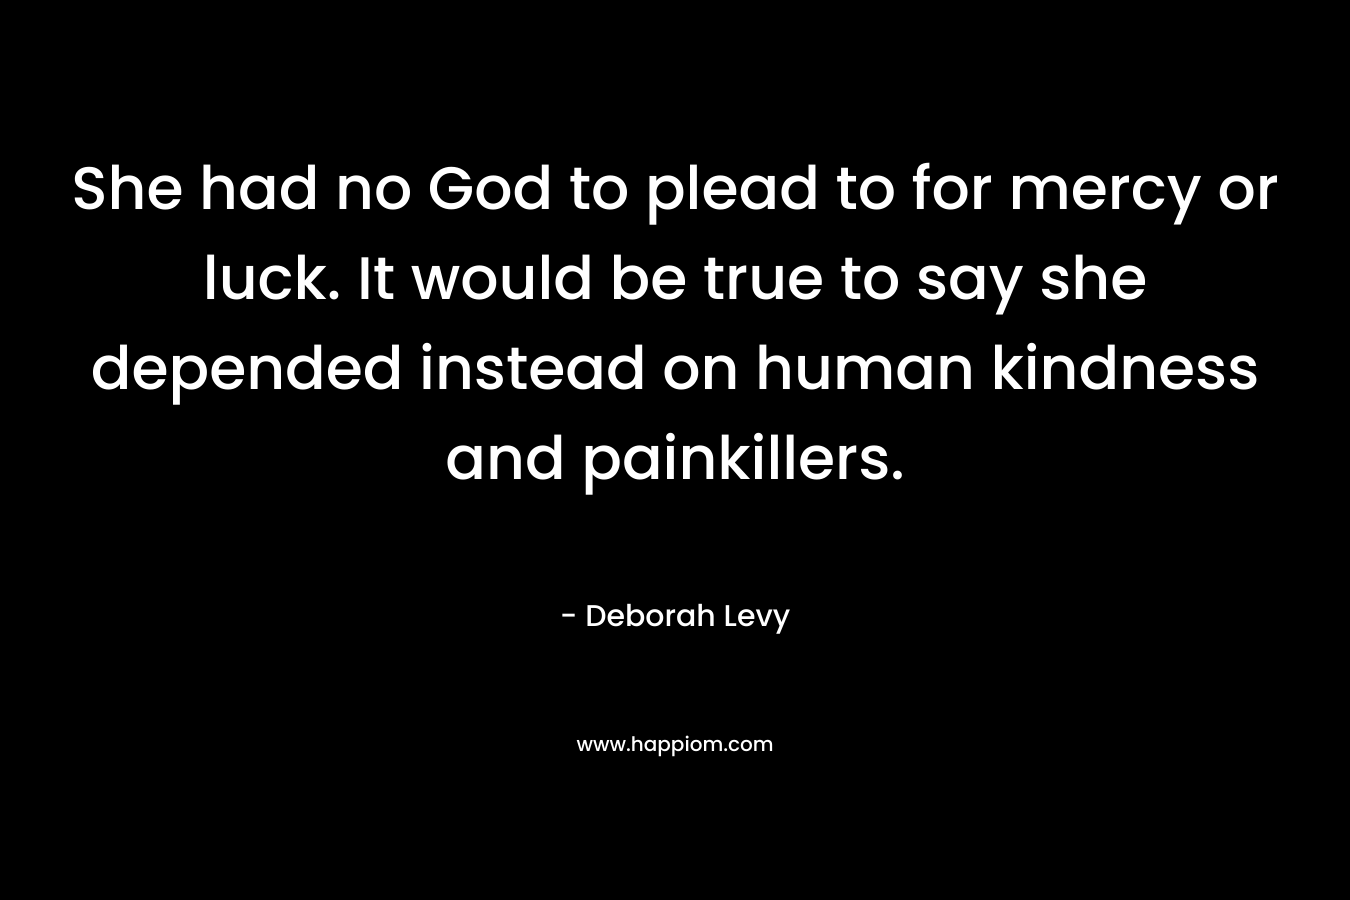 She had no God to plead to for mercy or luck. It would be true to say she depended instead on human kindness and painkillers. – Deborah Levy